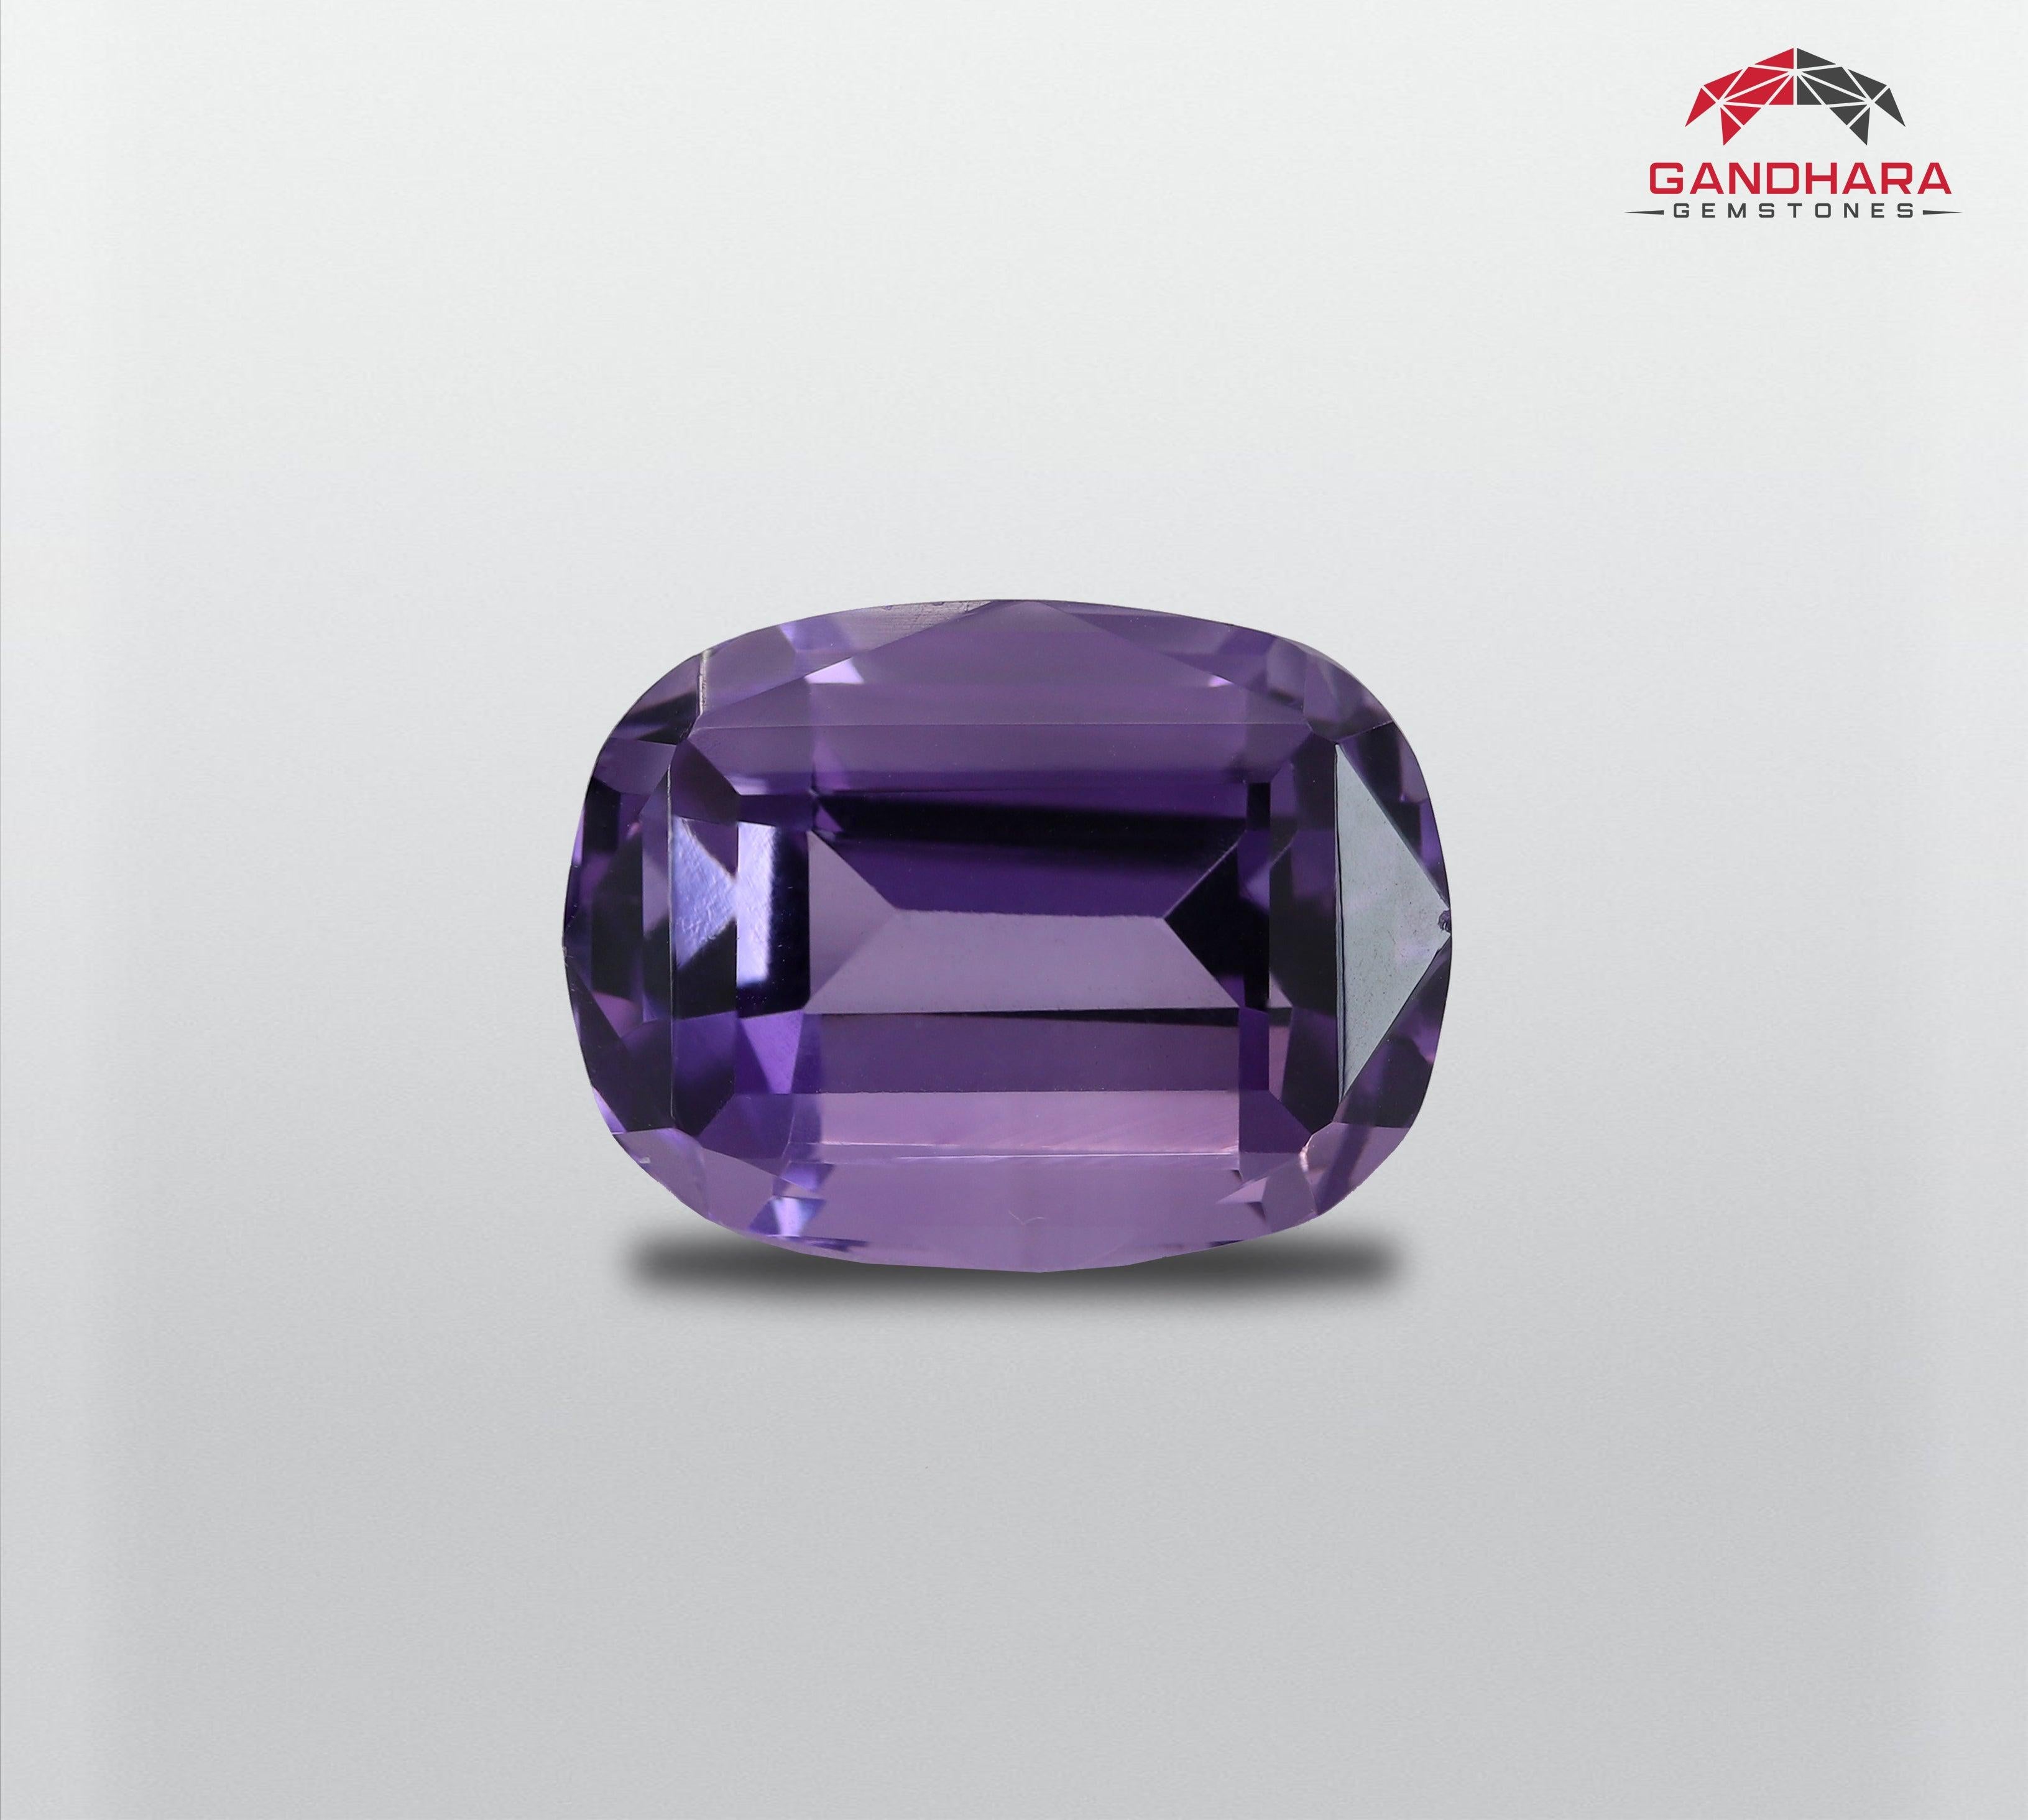 Adorable Purple Amethyst Gemstone, available for sale, natural high quality flawless 8.03 carats, custom cushion cut amethyst from Brazil.💜💜

 Product Information:
GEMSTONE TYPE Adorable Purple Amethyst Gemstone💜💜
WEIGHT 8.03 carats
DIMENSIONS